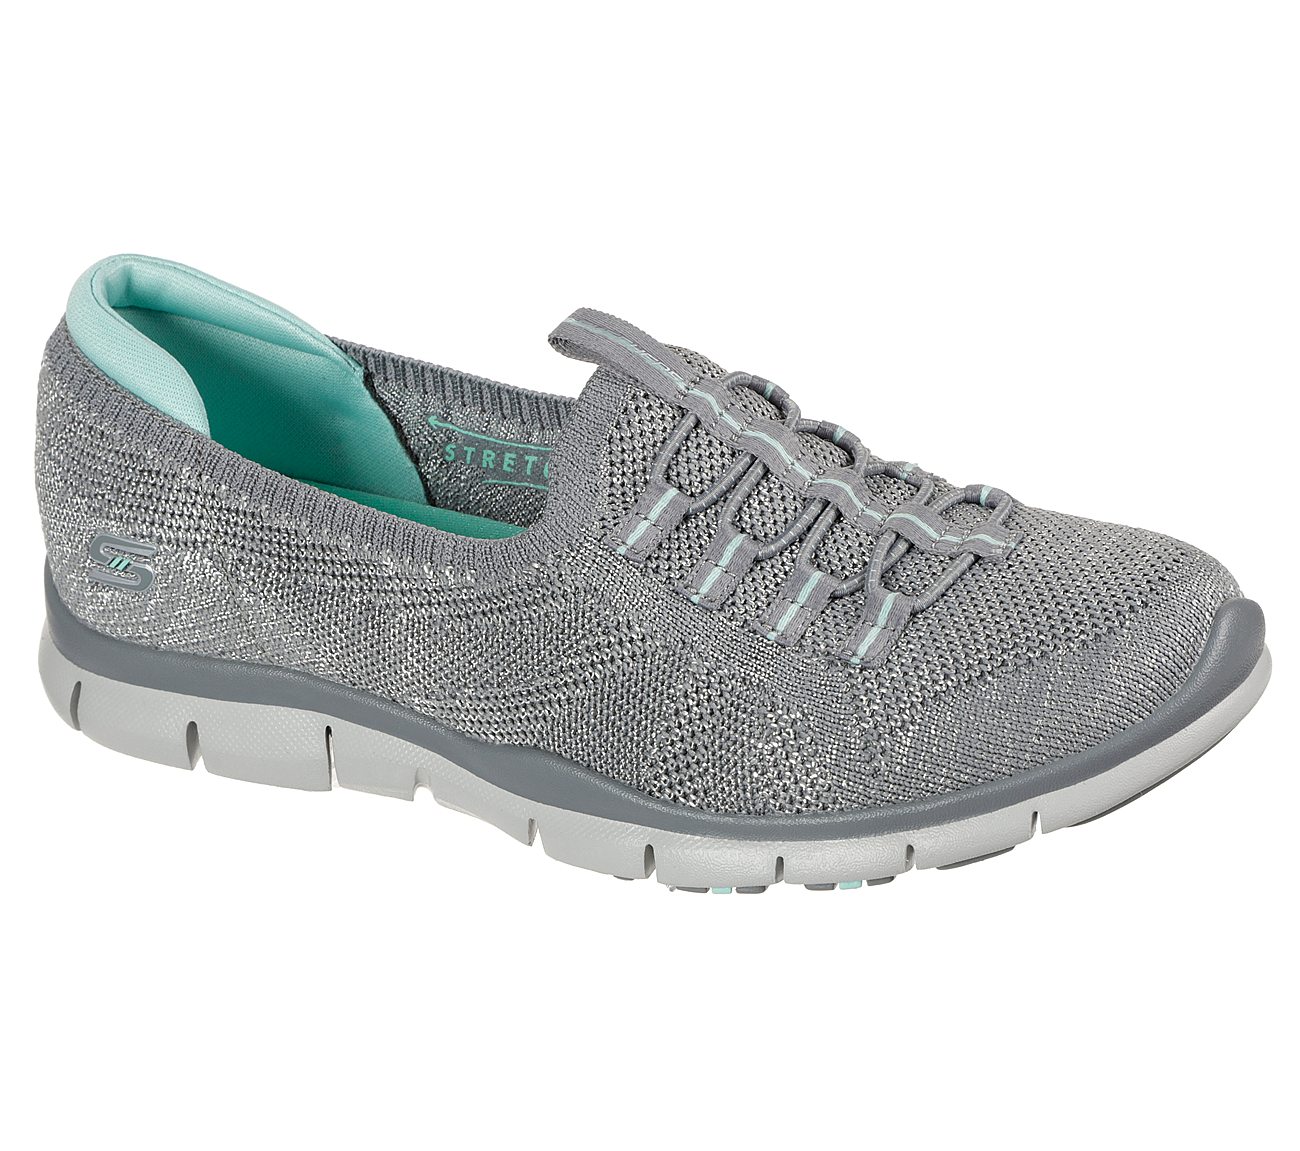 GRATIS - MORE PLAYFUL, GREY/MINT Footwear Right View